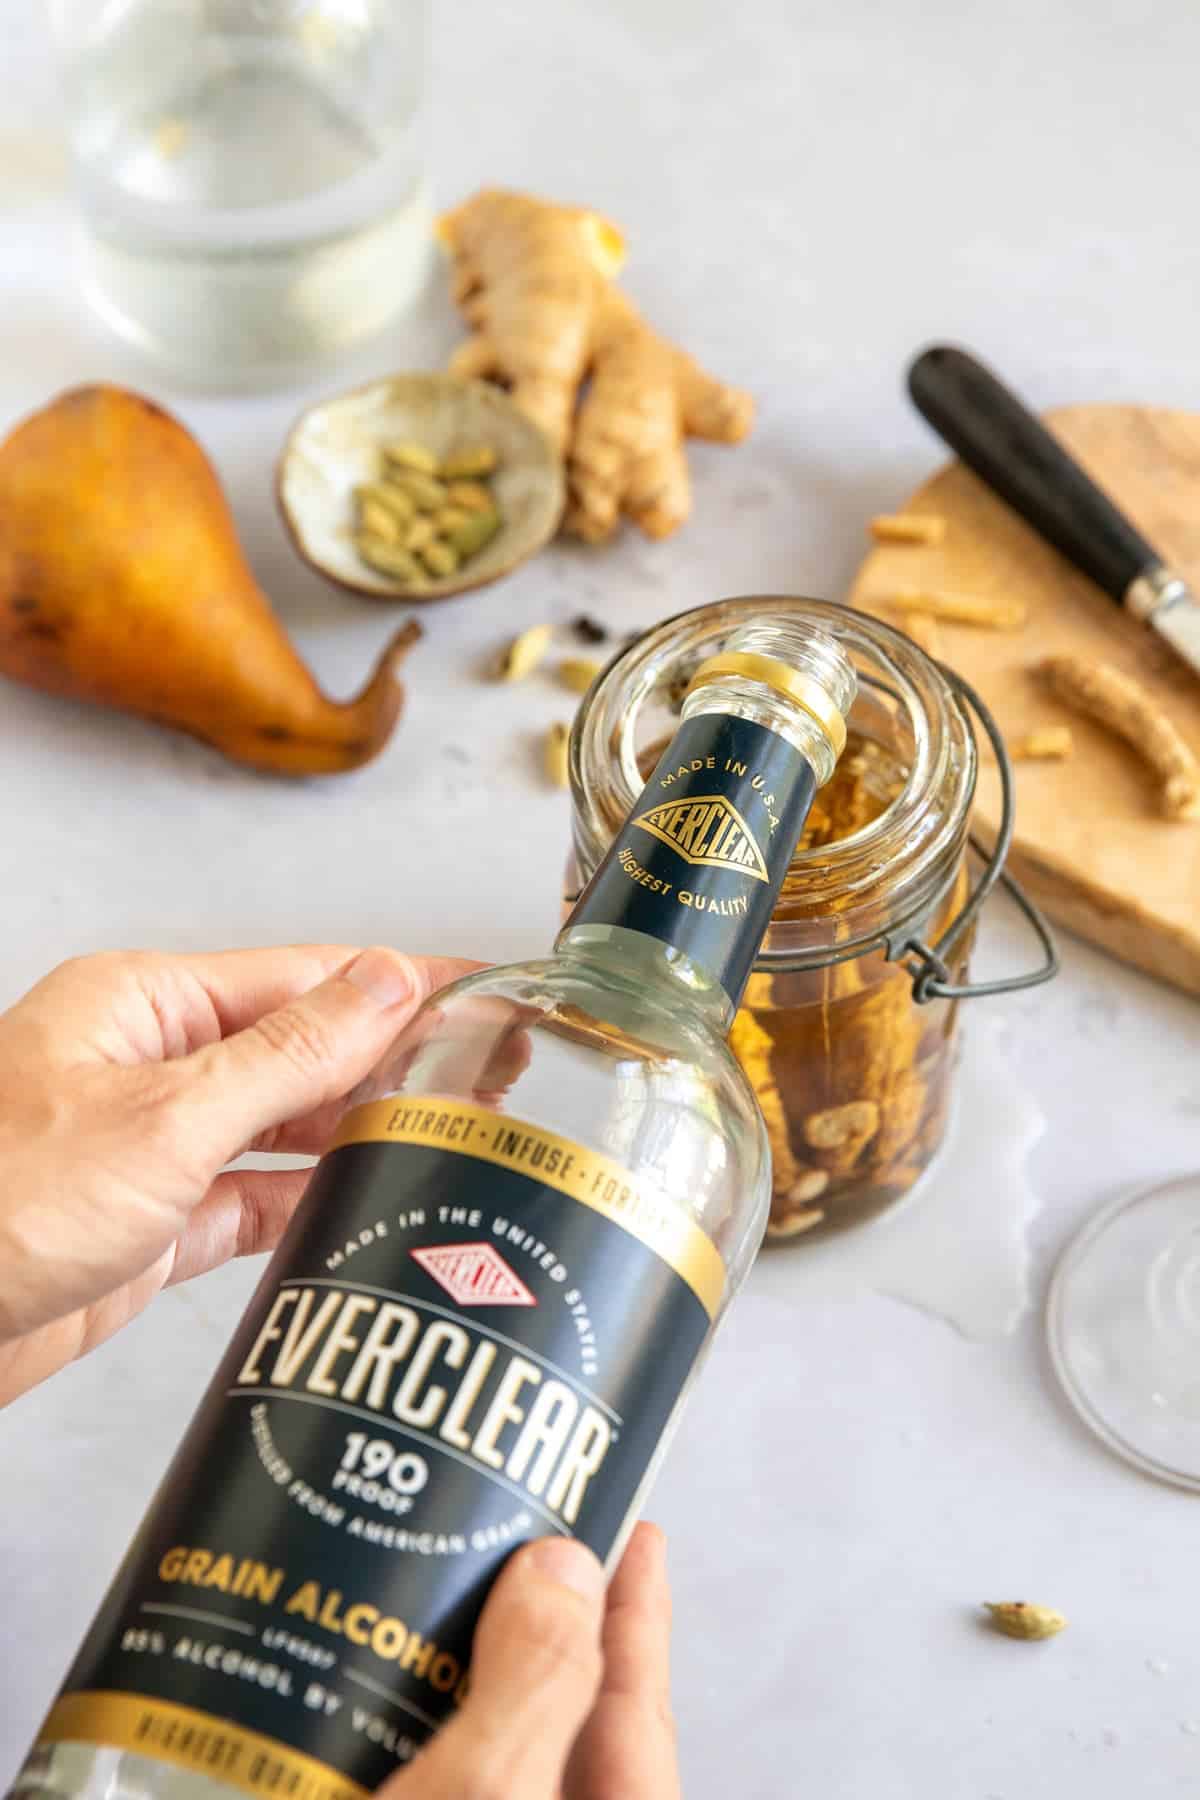 Making a homemade tincture with Everclear and ginseng